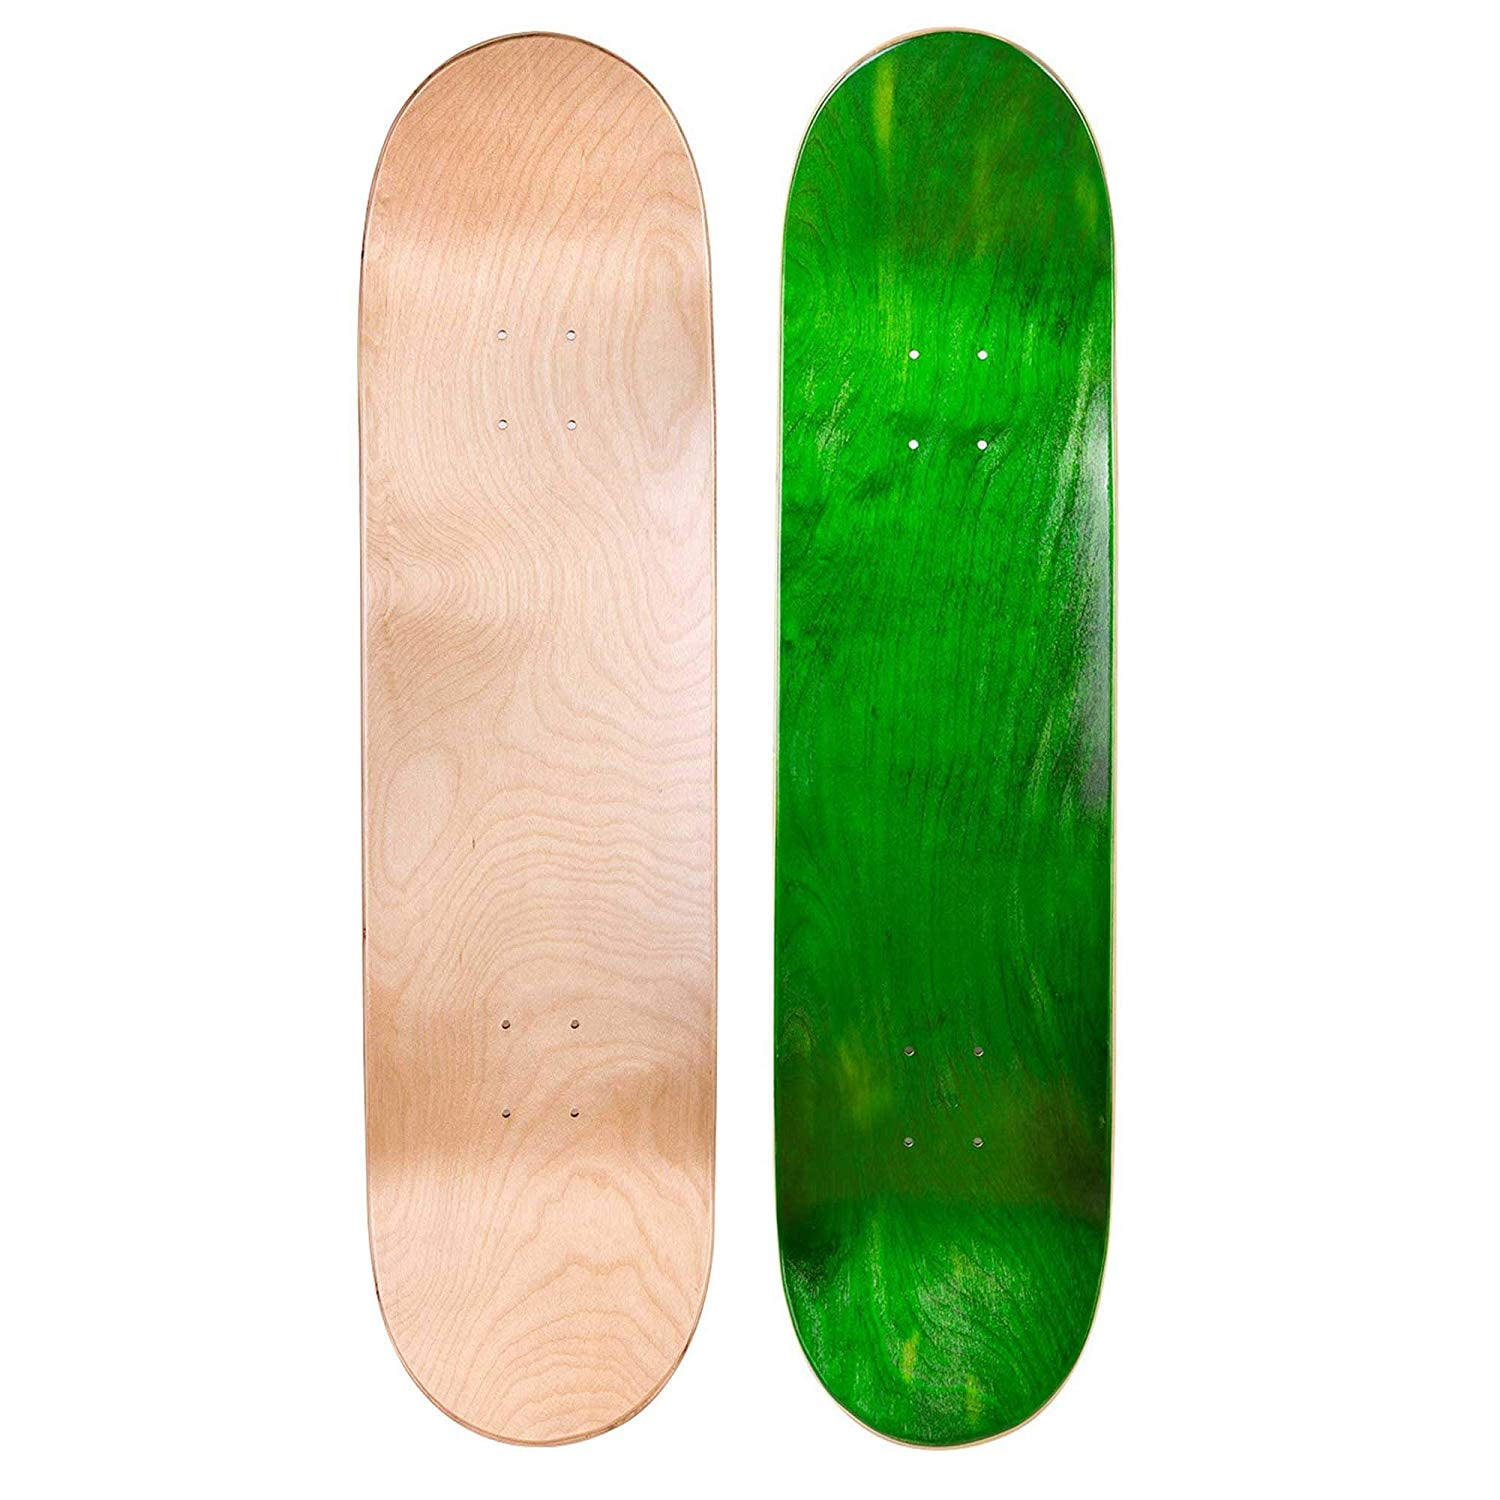 Cal 7 Blank Maple Skateboard Decks with Grip Tape Bundle of 3, Combinations 